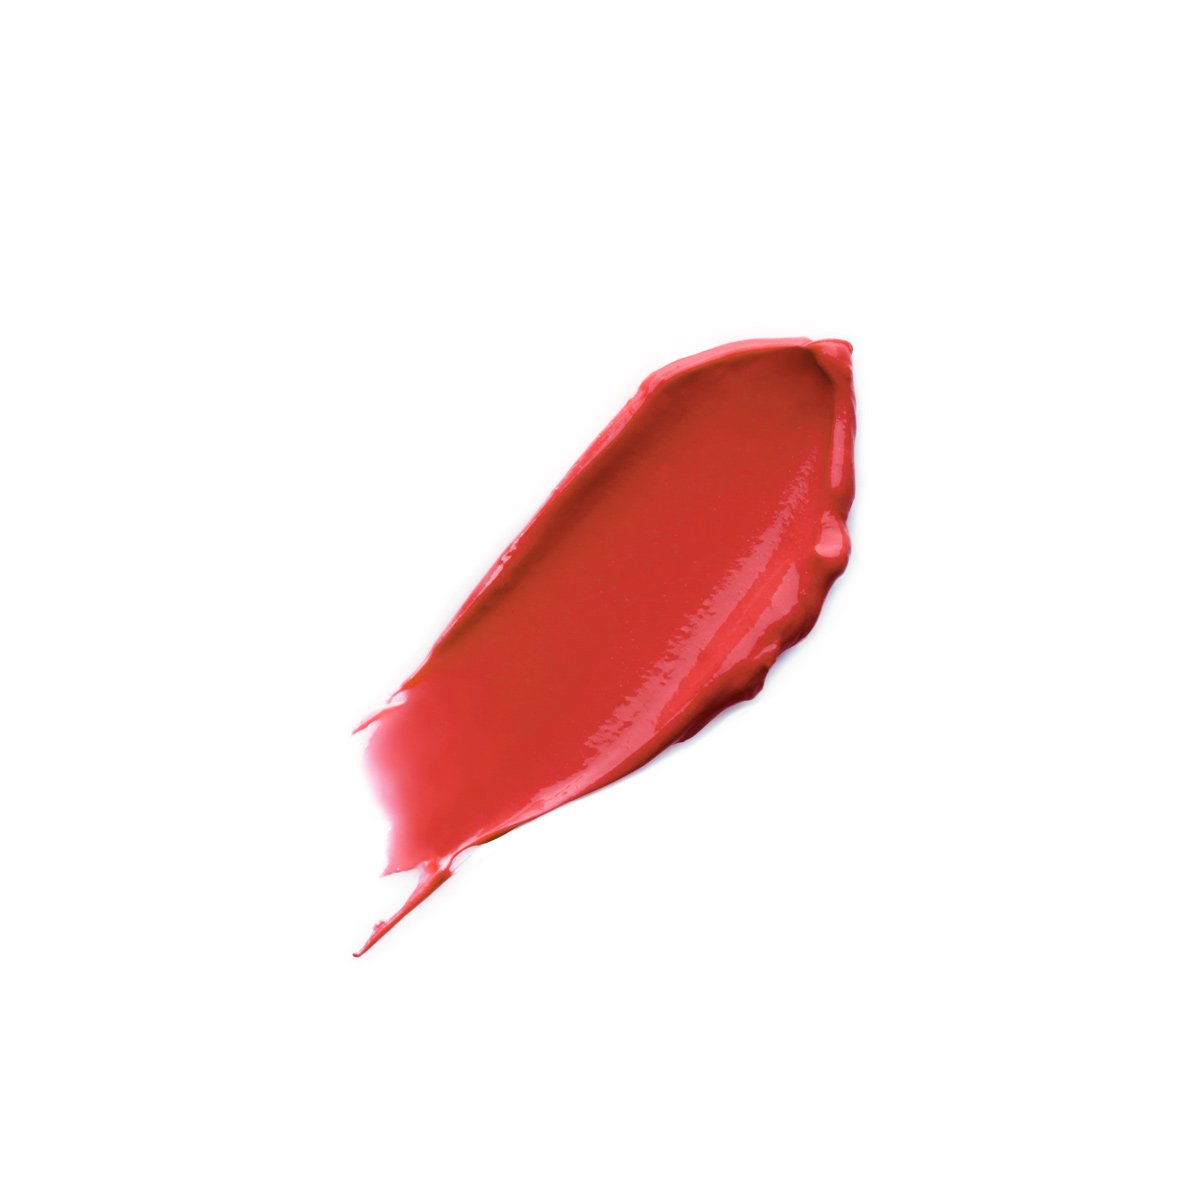 OH LAMOUR - ORANGY RED - sheer orangy red lipstick lip balm